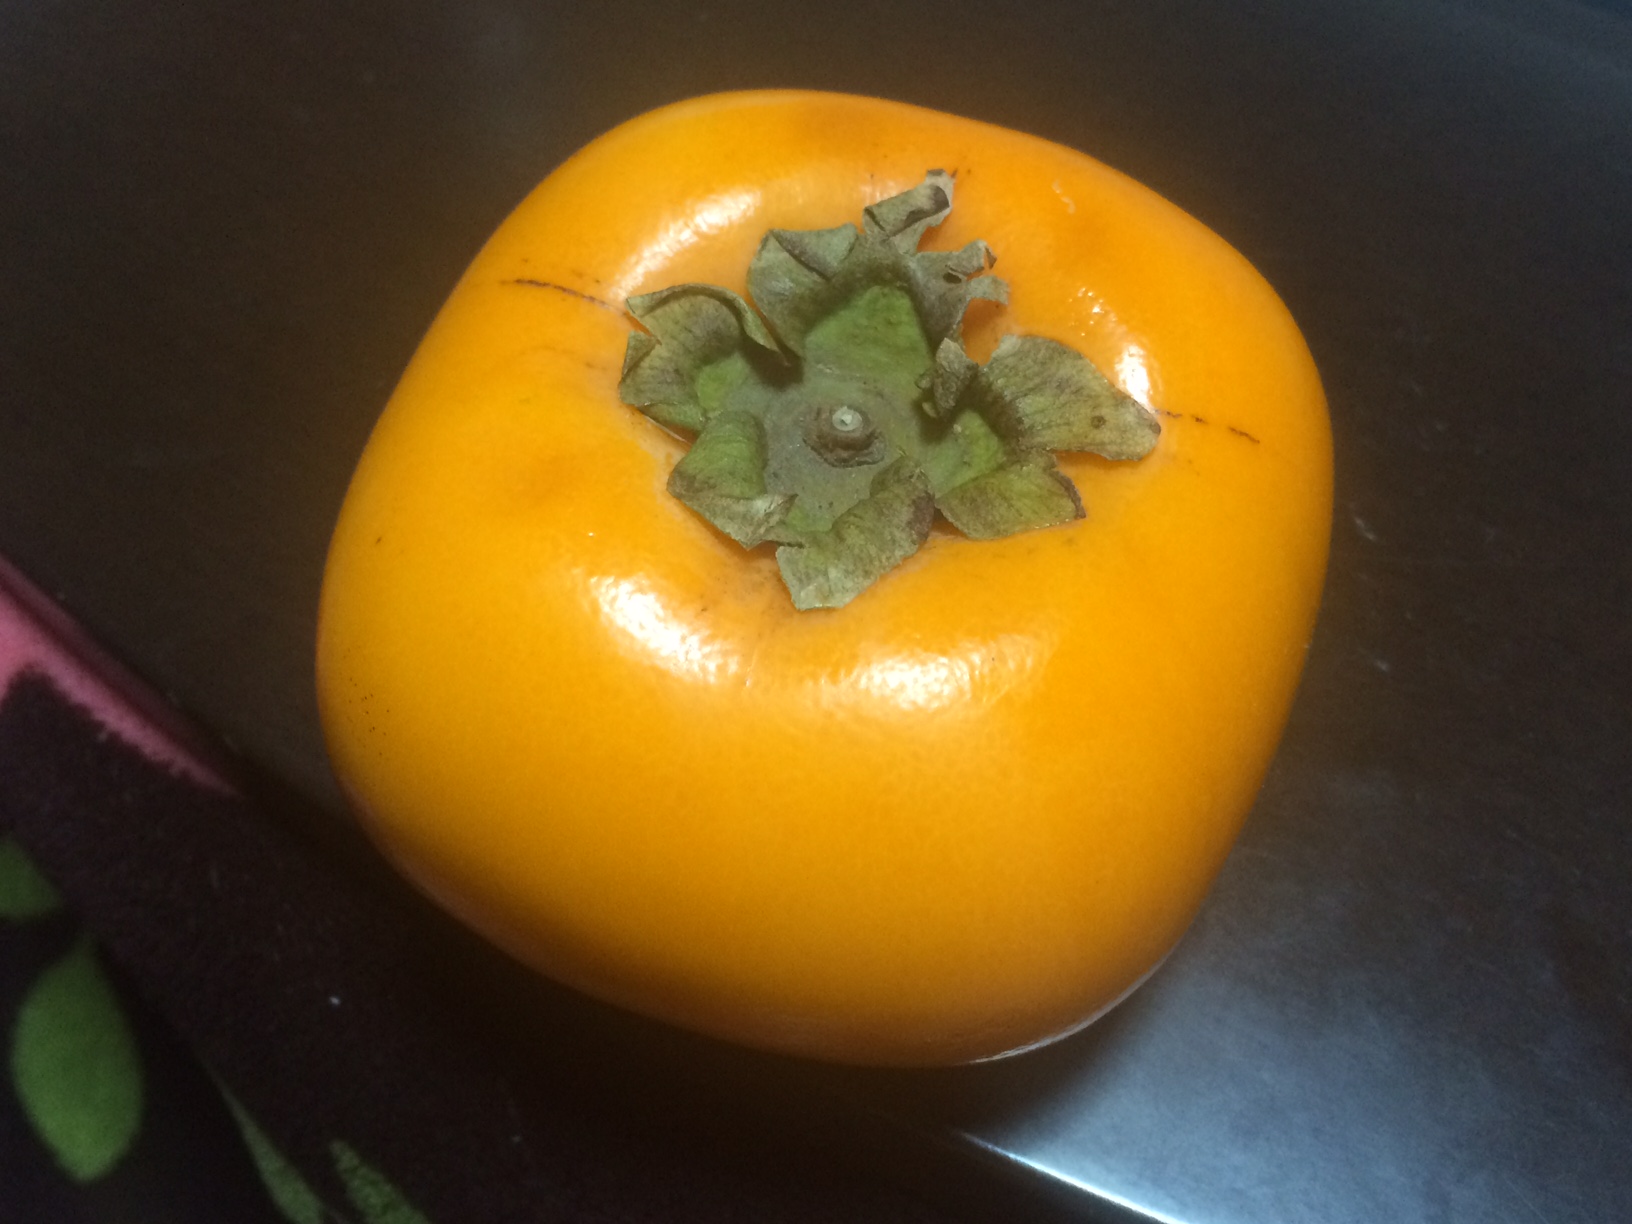 what a yummy persimmon!!